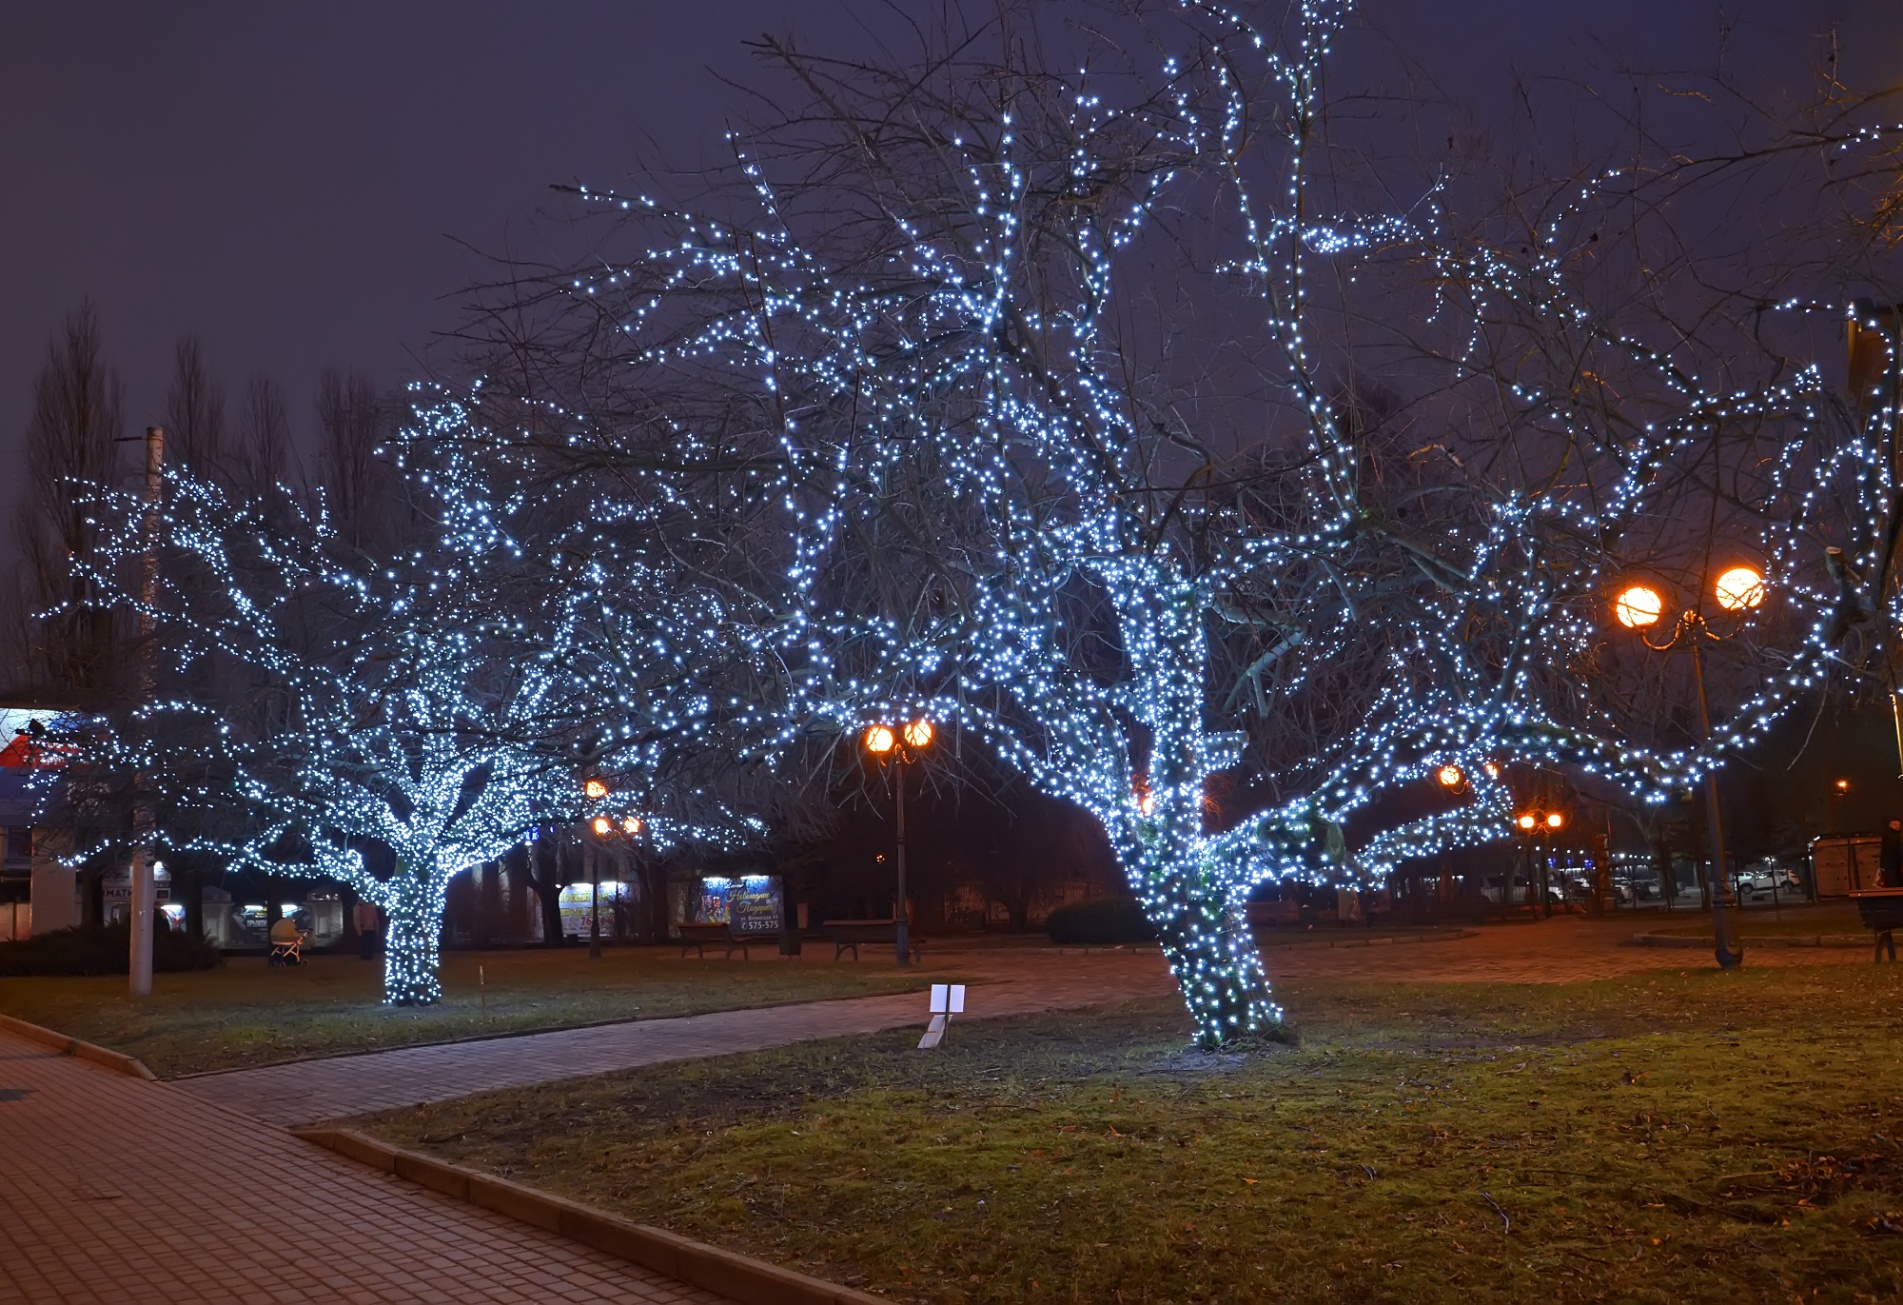 Glowing Blue Christmas Lights And Trees In The Park